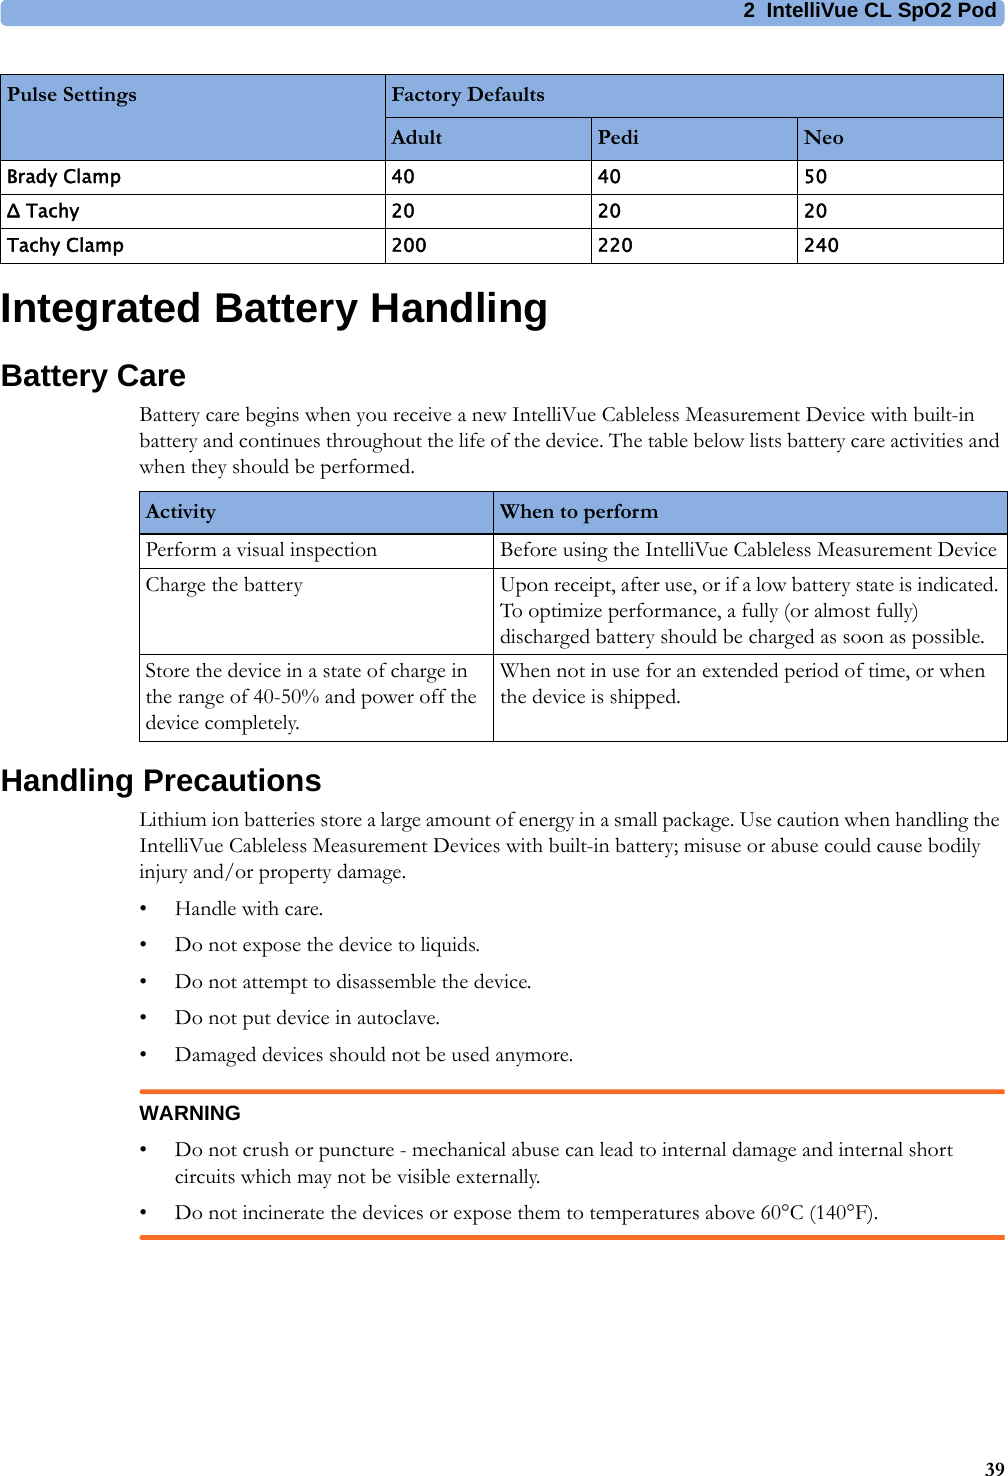 2 IntelliVue CL SpO2 Pod39Integrated Battery HandlingBattery CareBattery care begins when you receive a new IntelliVue Cableless Measurement Device with built-in battery and continues throughout the life of the device. The table below lists battery care activities and when they should be performed.Handling PrecautionsLithium ion batteries store a large amount of energy in a small package. Use caution when handling the IntelliVue Cableless Measurement Devices with built-in battery; misuse or abuse could cause bodily injury and/or property damage.• Handle with care.• Do not expose the device to liquids.• Do not attempt to disassemble the device.• Do not put device in autoclave.• Damaged devices should not be used anymore.WARNING• Do not crush or puncture - mechanical abuse can lead to internal damage and internal short circuits which may not be visible externally.• Do not incinerate the devices or expose them to temperatures above 60°C (140°F).Brady Clamp 404050Δ Tachy 202020Tachy Clamp 200 220 240Pulse Settings Factory DefaultsAdult Pedi NeoActivity When to performPerform a visual inspection Before using the IntelliVue Cableless Measurement DeviceCharge the battery Upon receipt, after use, or if a low battery state is indicated. To optimize performance, a fully (or almost fully) discharged battery should be charged as soon as possible.Store the device in a state of charge in the range of 40-50% and power off the device completely.When not in use for an extended period of time, or when the device is shipped. 